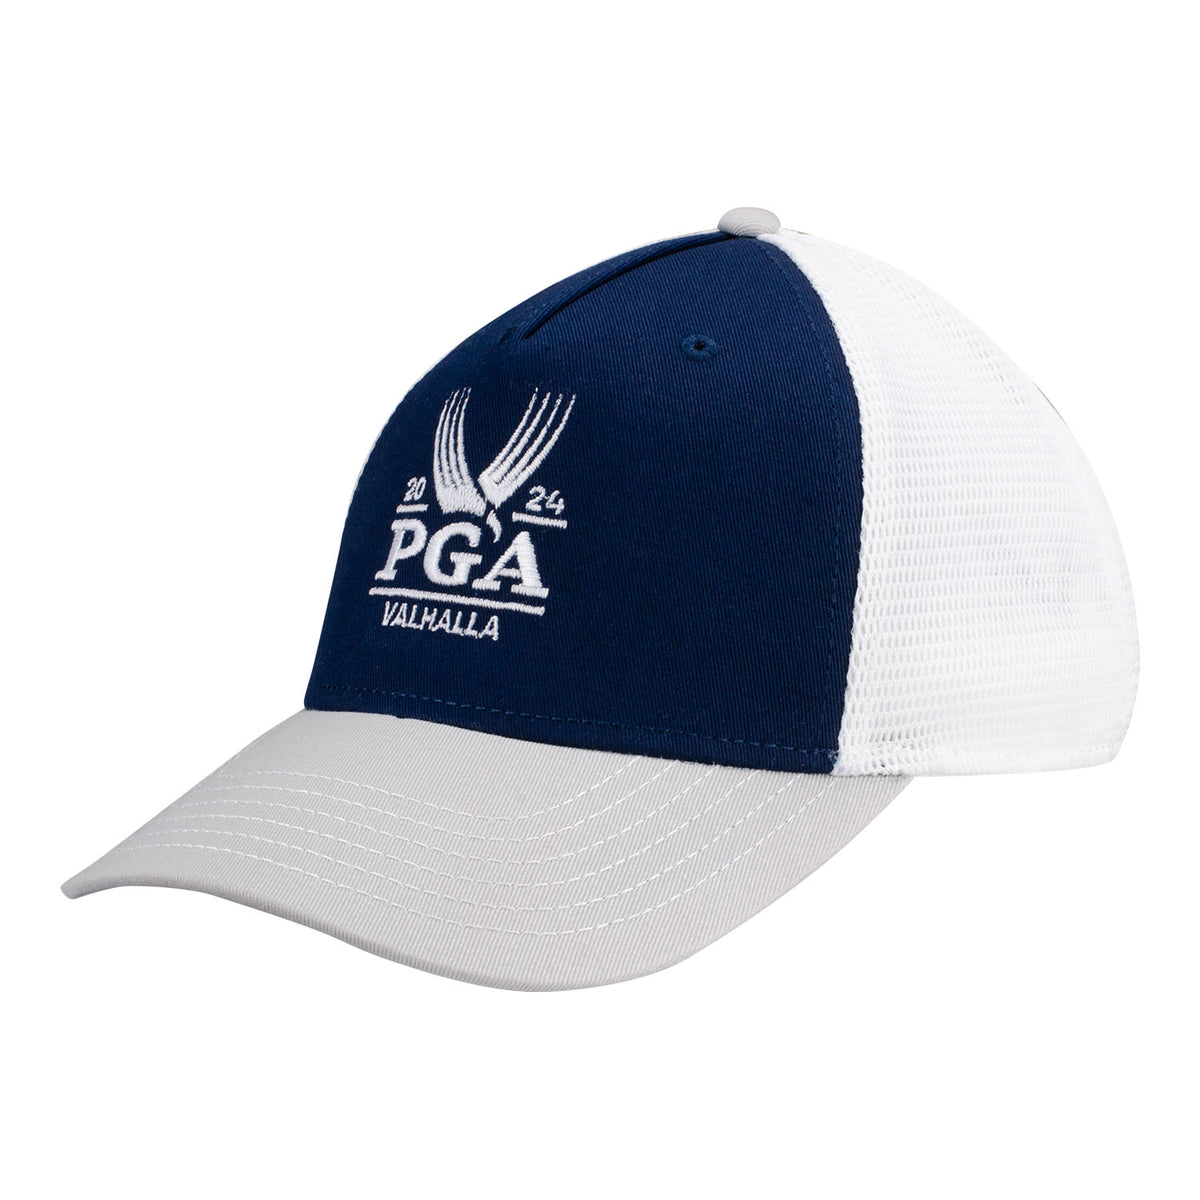 Ahead 2024 PGA Championship Classic - Fit Cotton Twill Mesh Back Adjustable Hat in Navy / Grey / White - Angled Front Left View